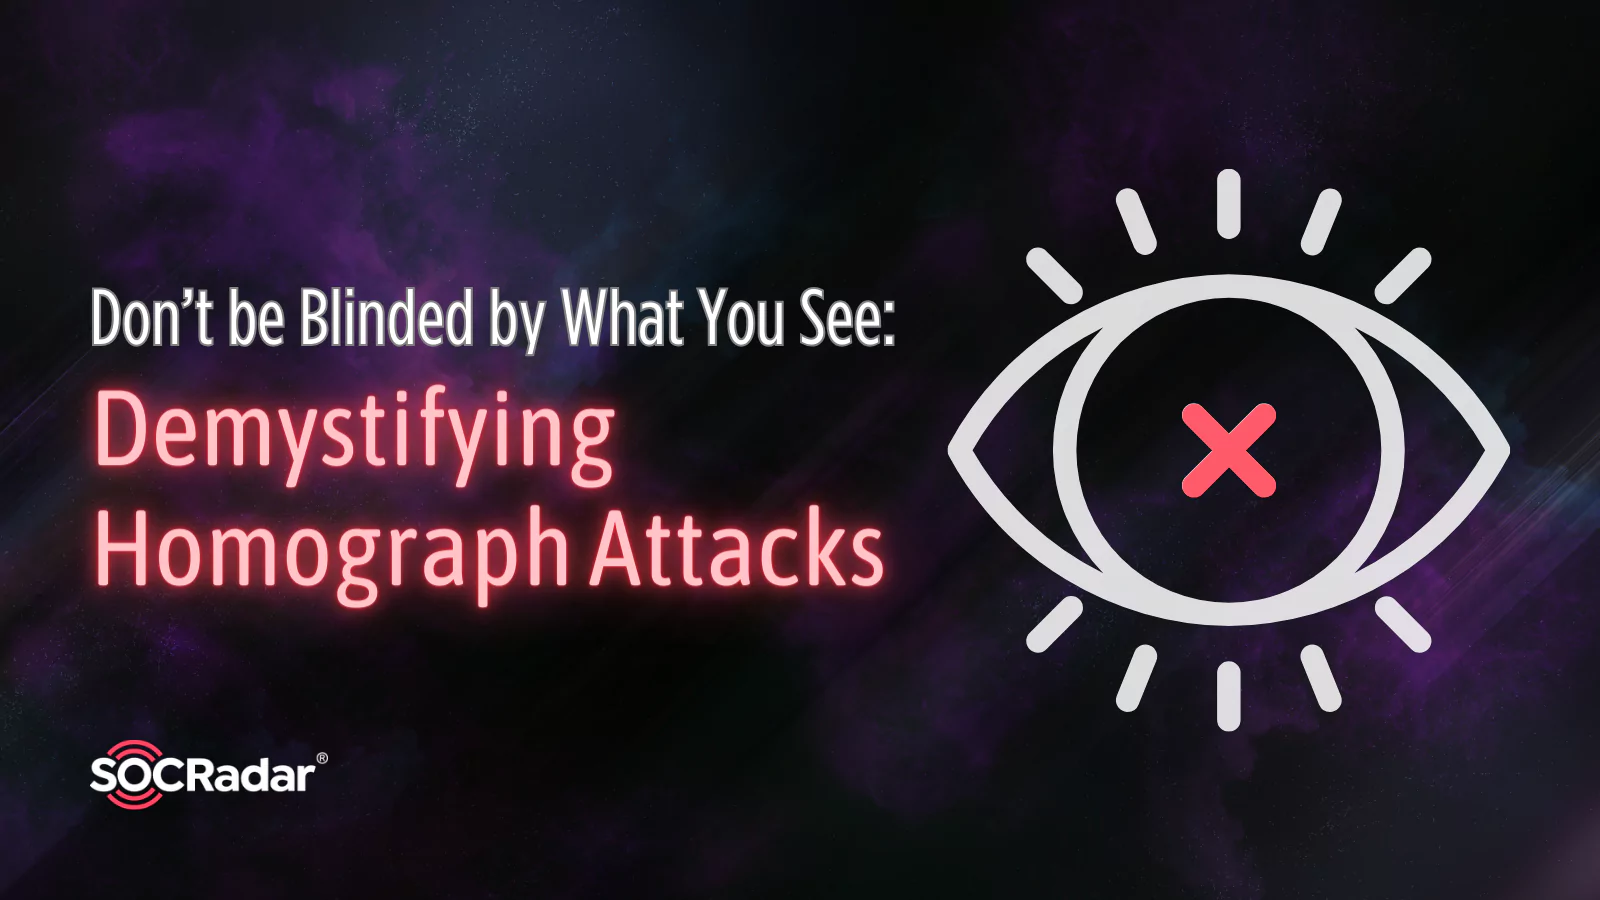 SOCRadar® Cyber Intelligence Inc. | Don’t be Blinded by What You See: Demystifying Homograph Attacks